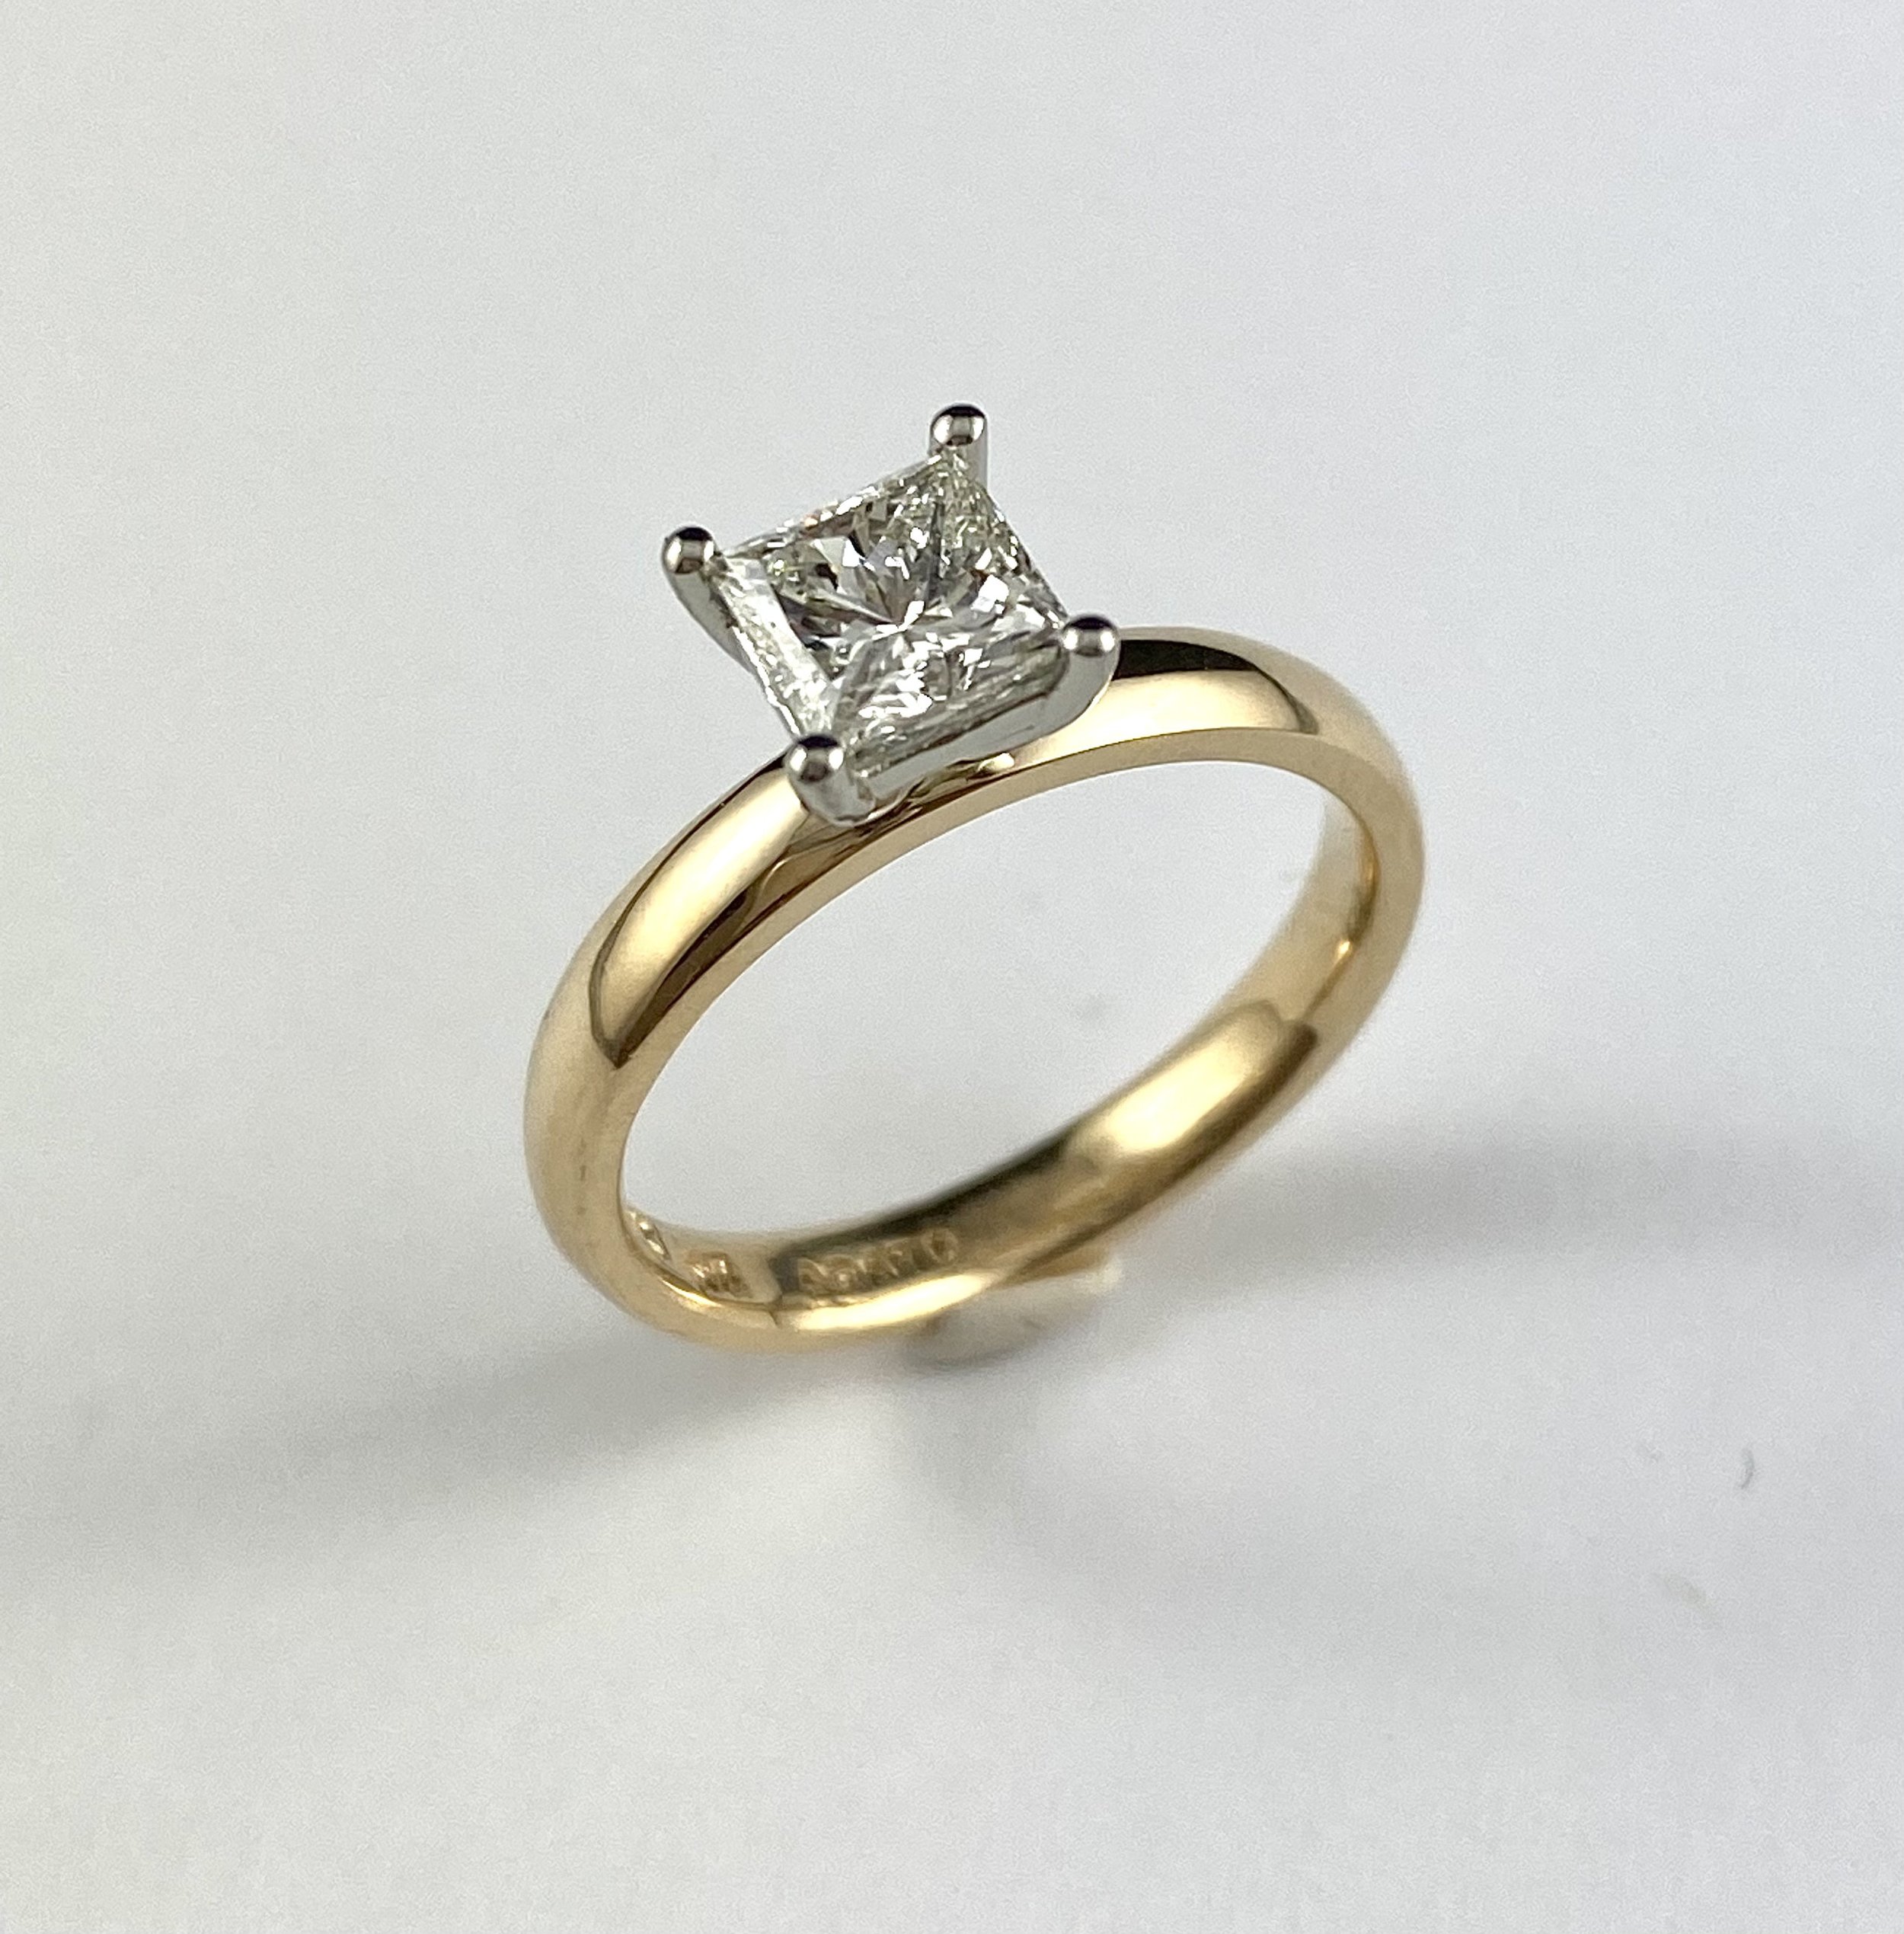 19K White and 18K Yellow Gold Princess Cut Diamond Solitaire Ring